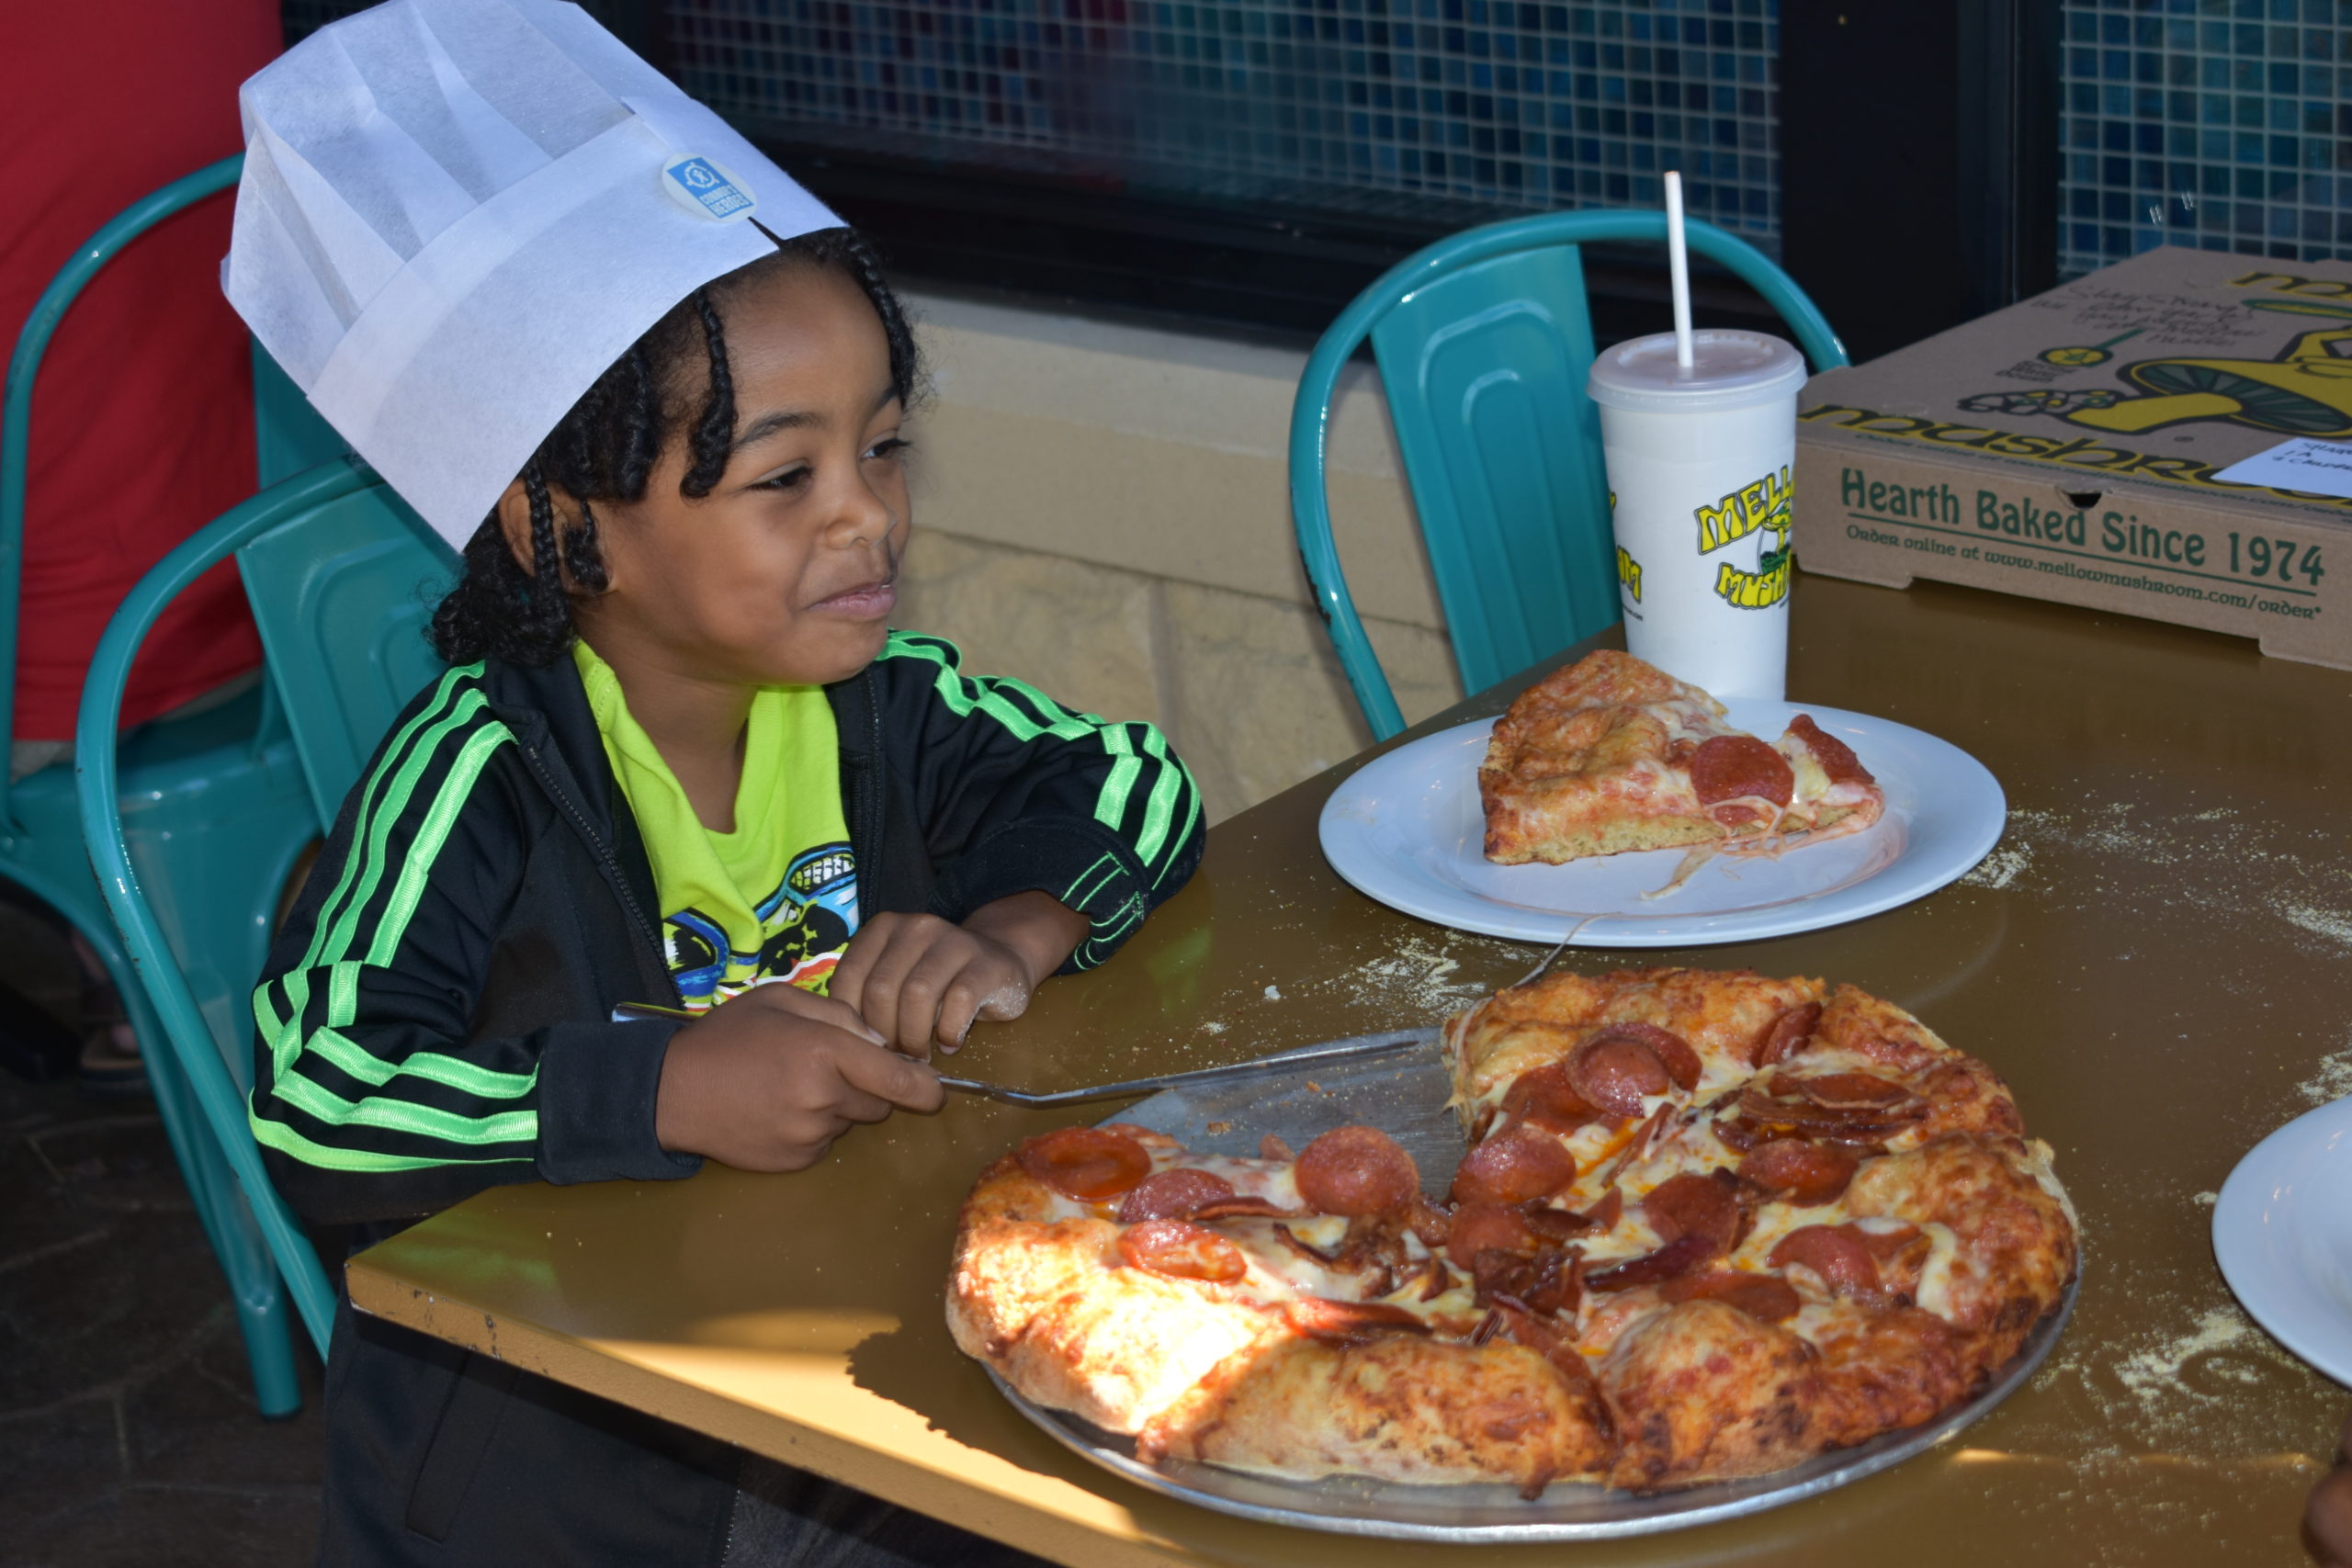 Image boy wearing a chef hat and eating a pizza